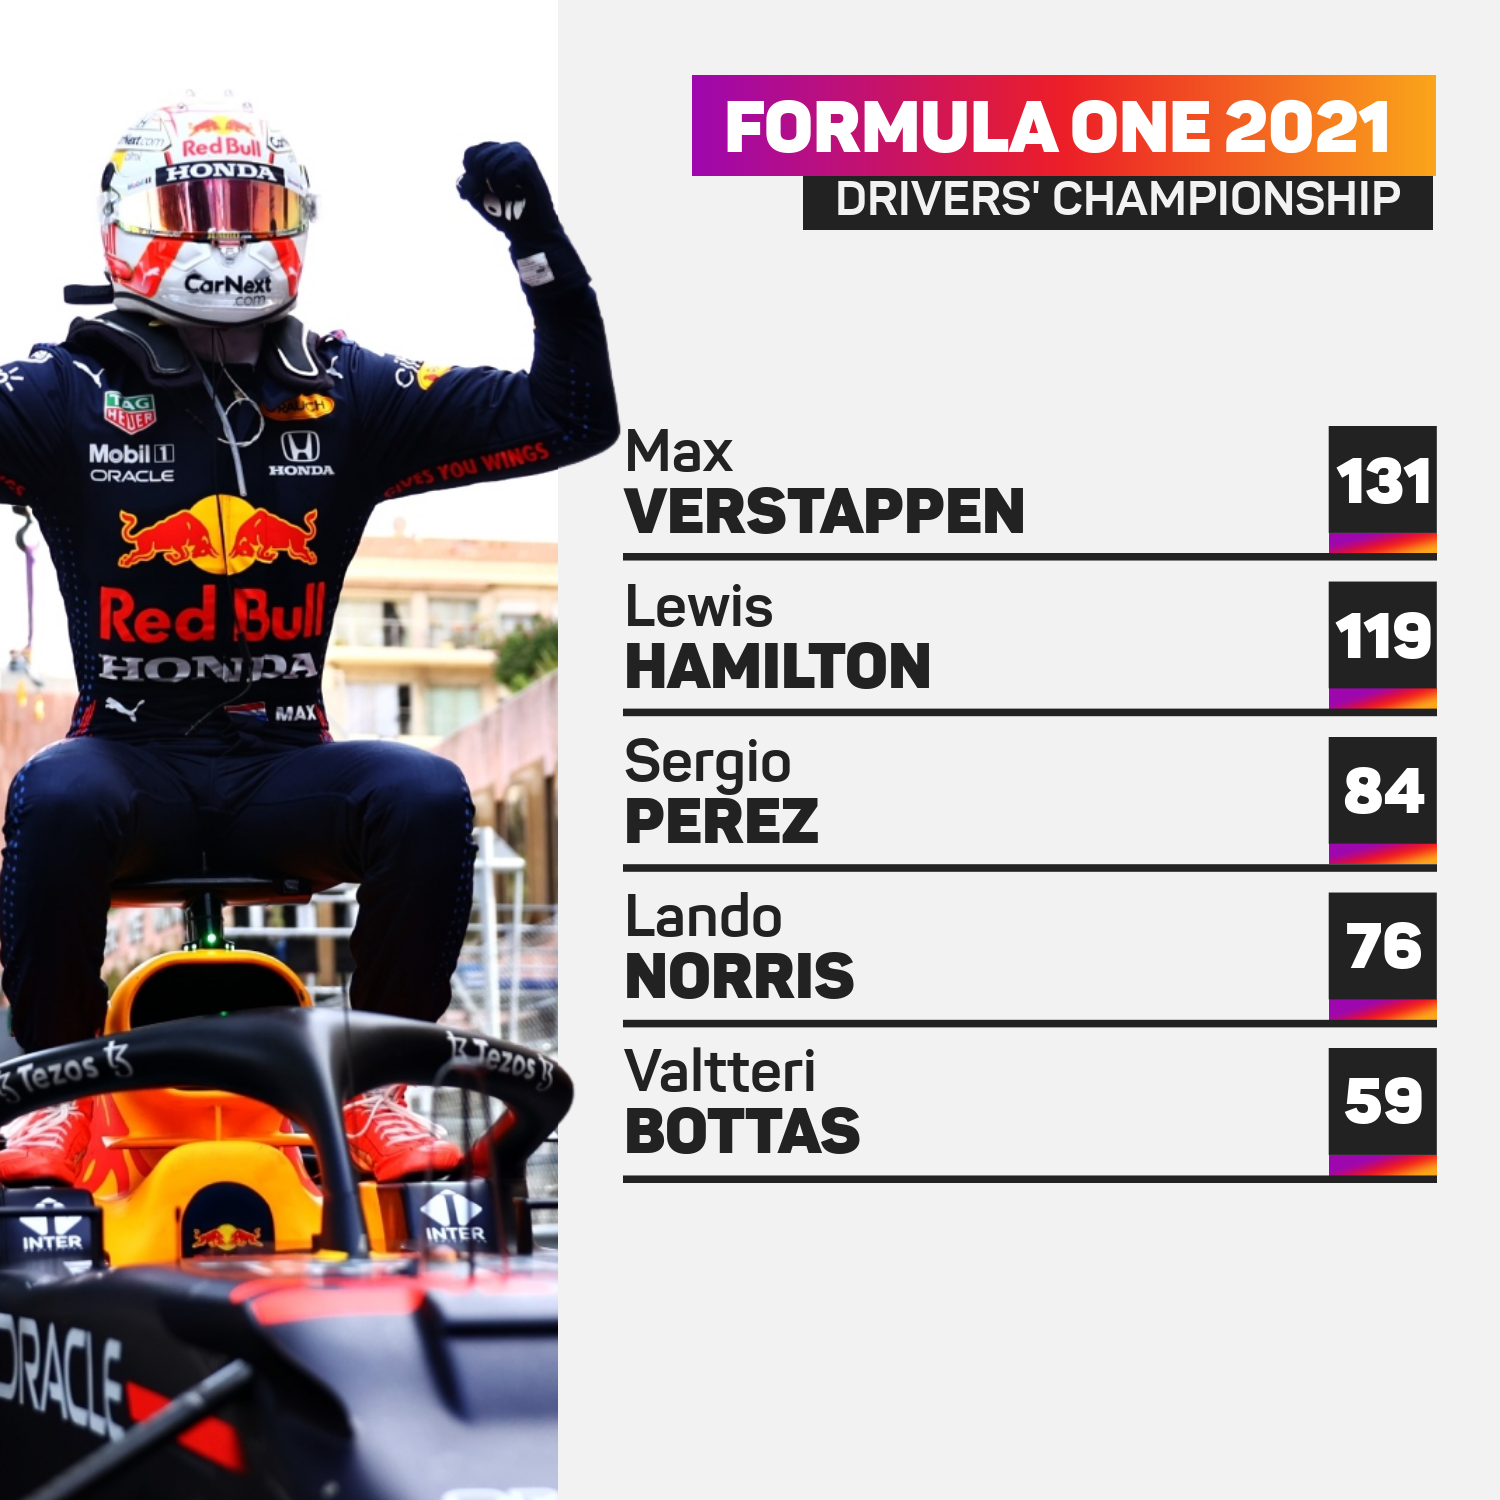 Max Verstappen leads the drivers' championship